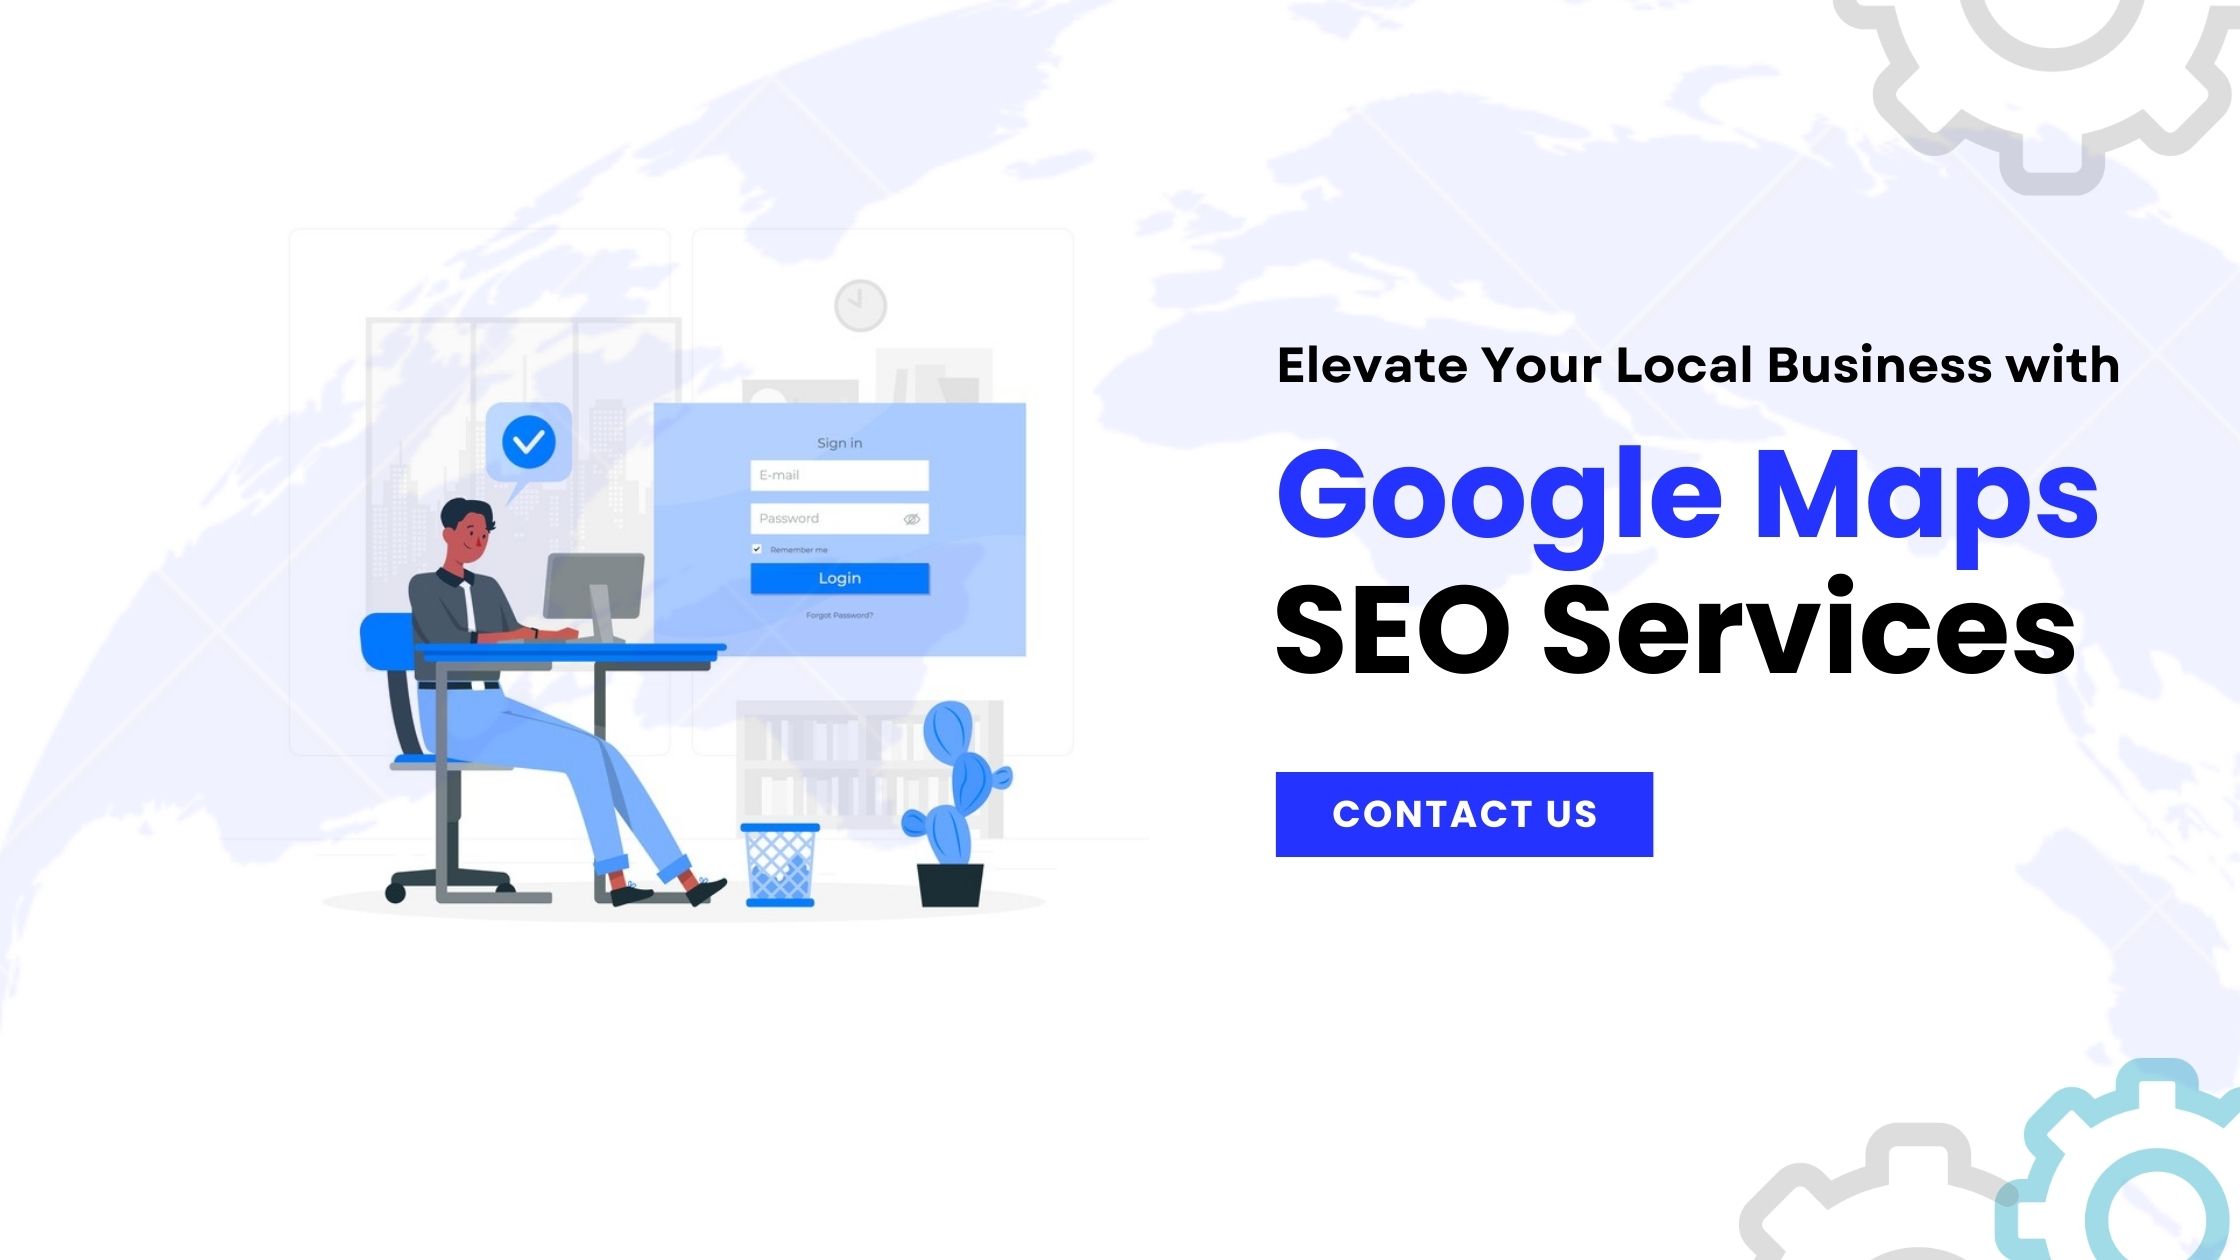 Elevate Your Local Business with Google Maps SEO Services